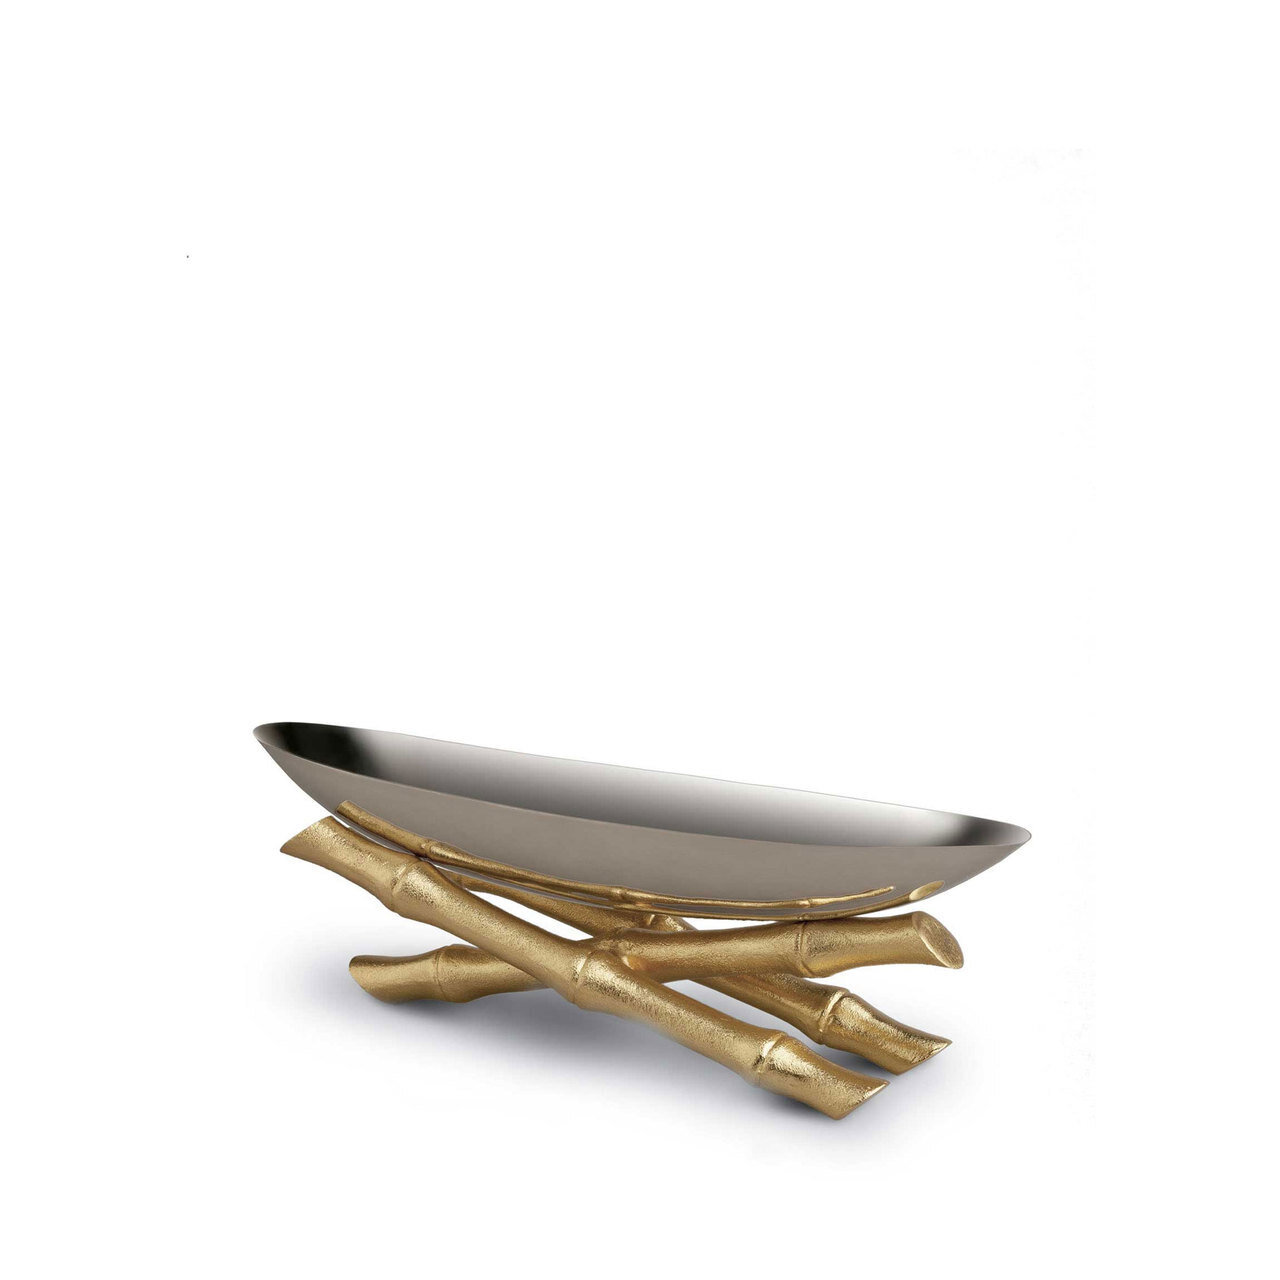 L'Objet Bambou Serving Boat Small 24k Gold-Plated Stainless Steel